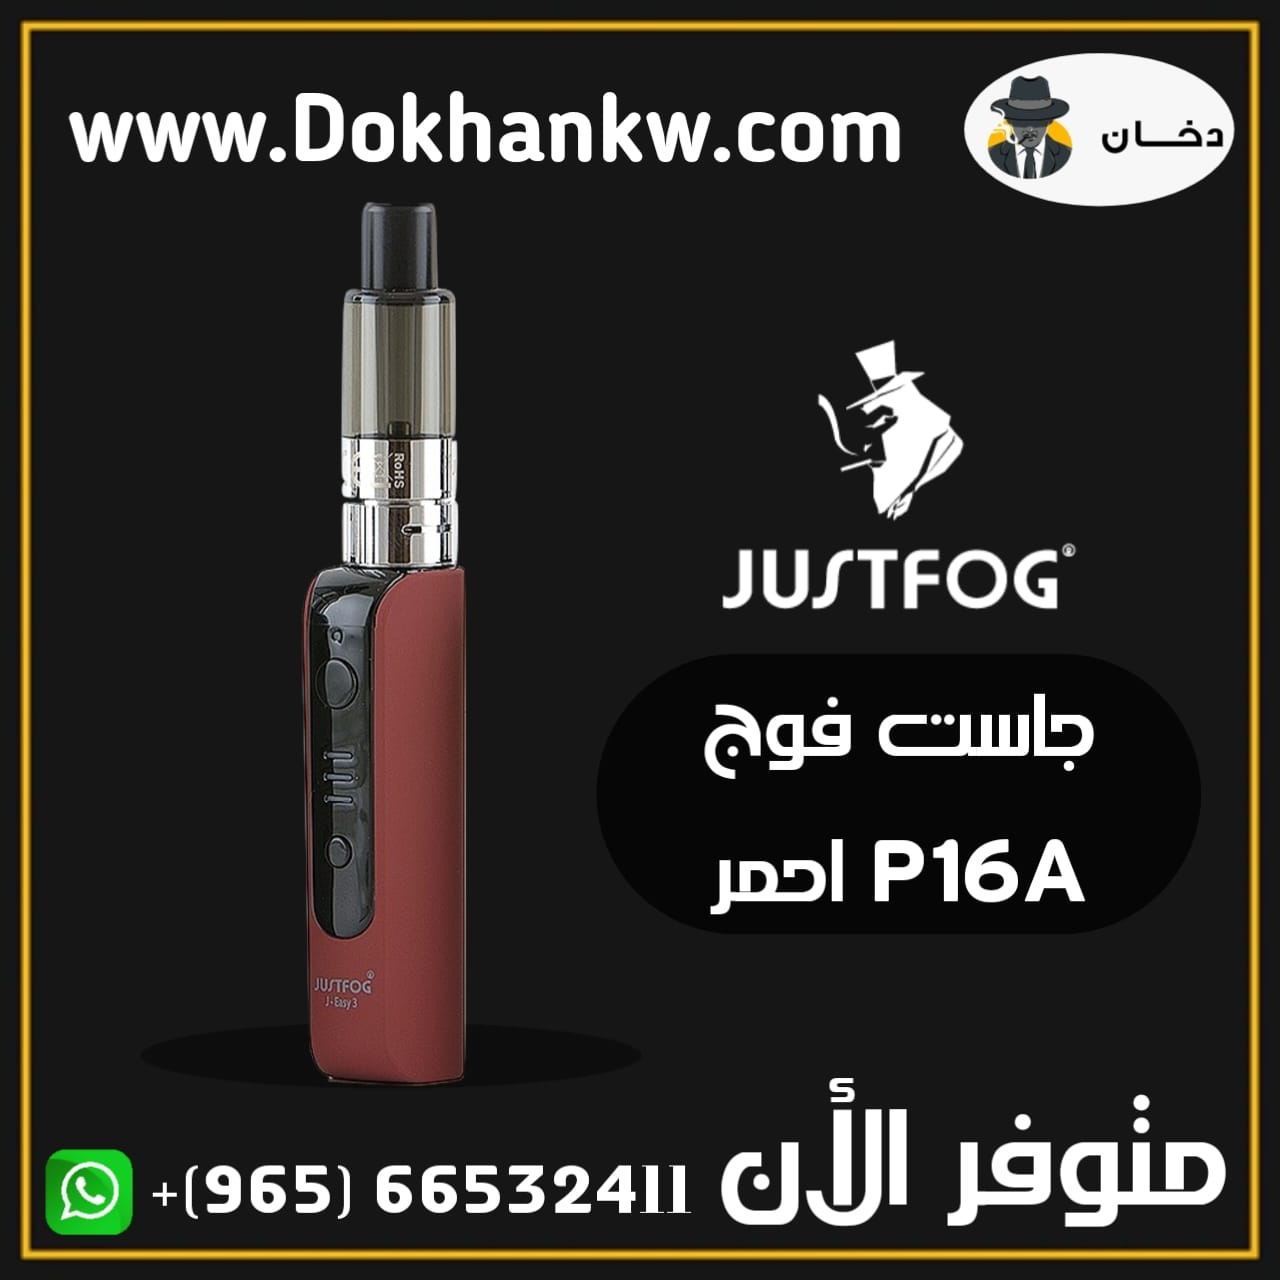 JUSTFOG P16A RED